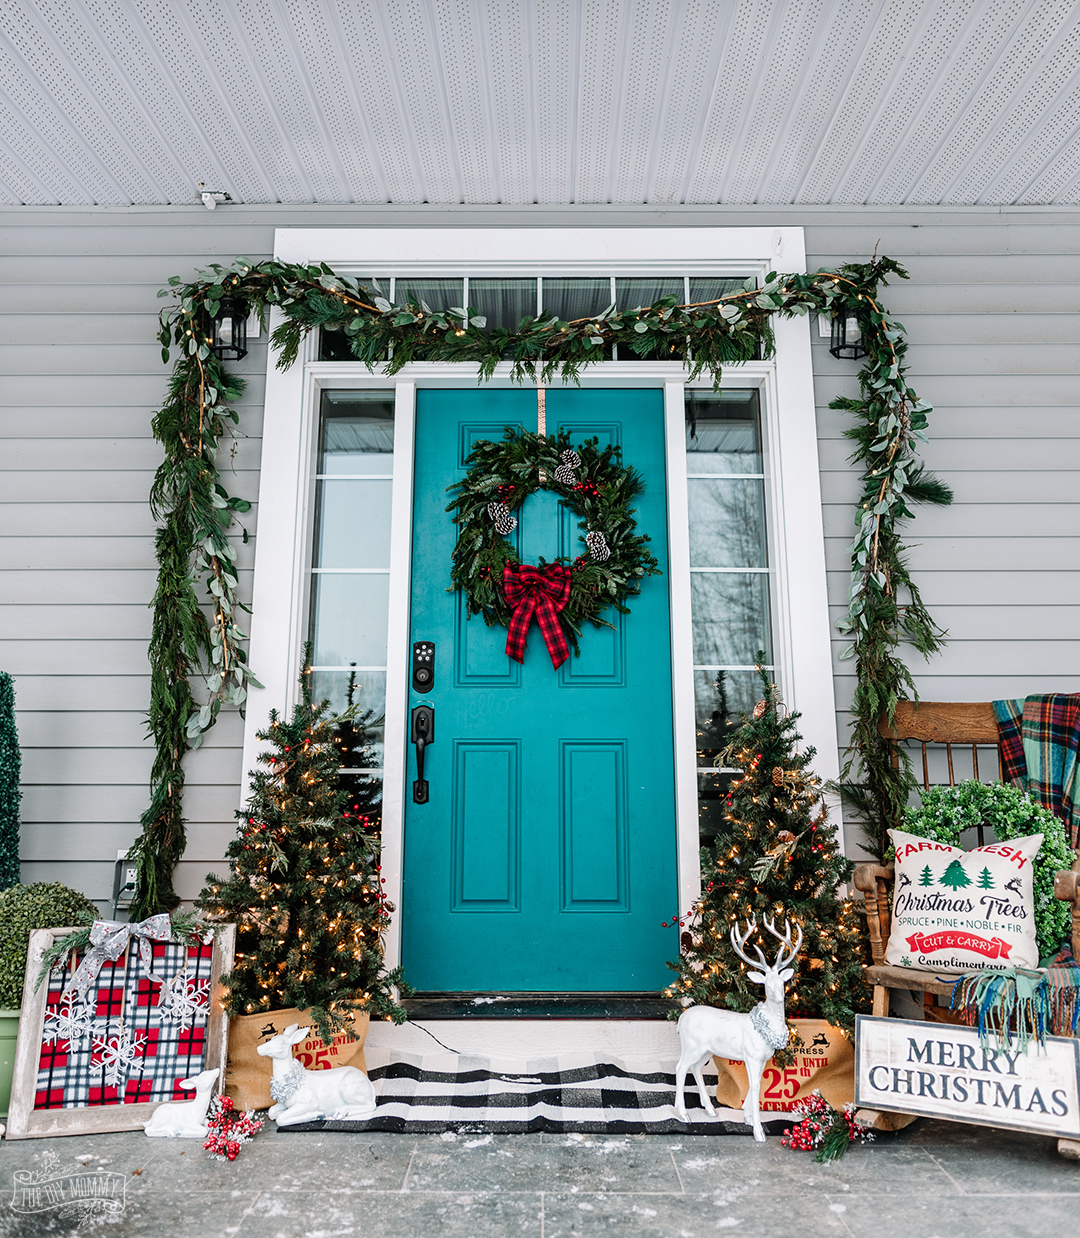 Christmas front porch in traditional farmhouse decor in reds, greens and teal colors